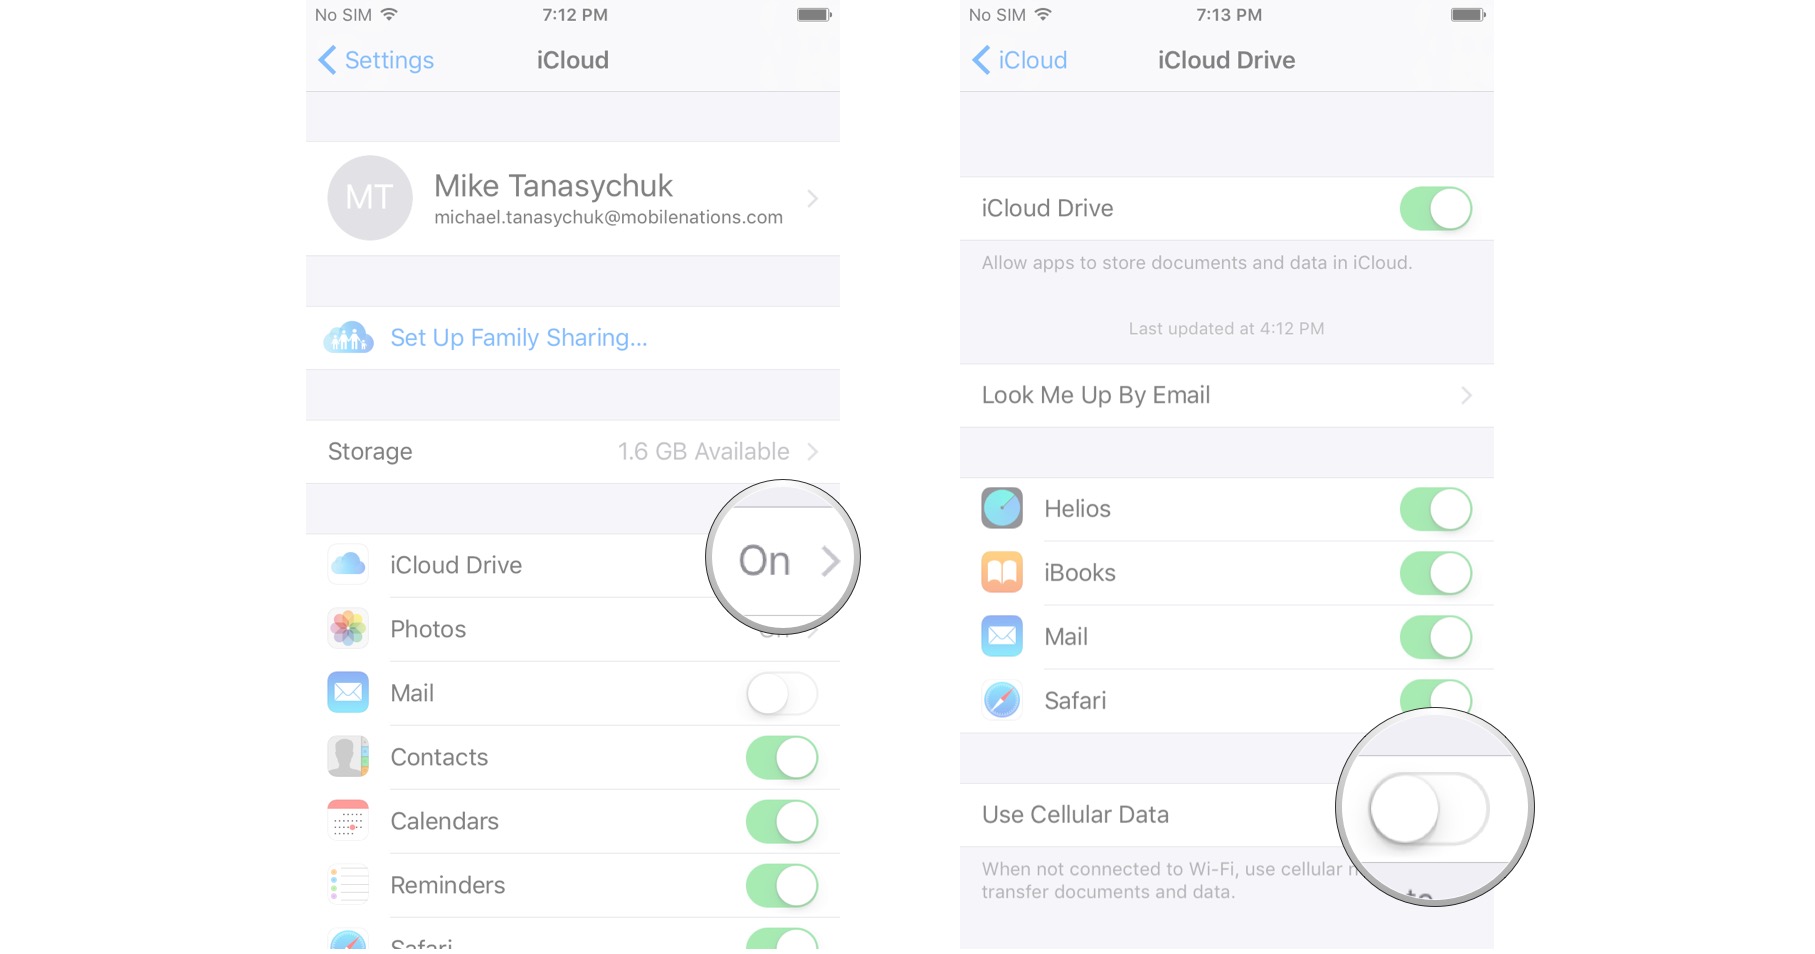 Tap on iCloud Drive and scroll all the way to the bottom and turn off the cellular data option.